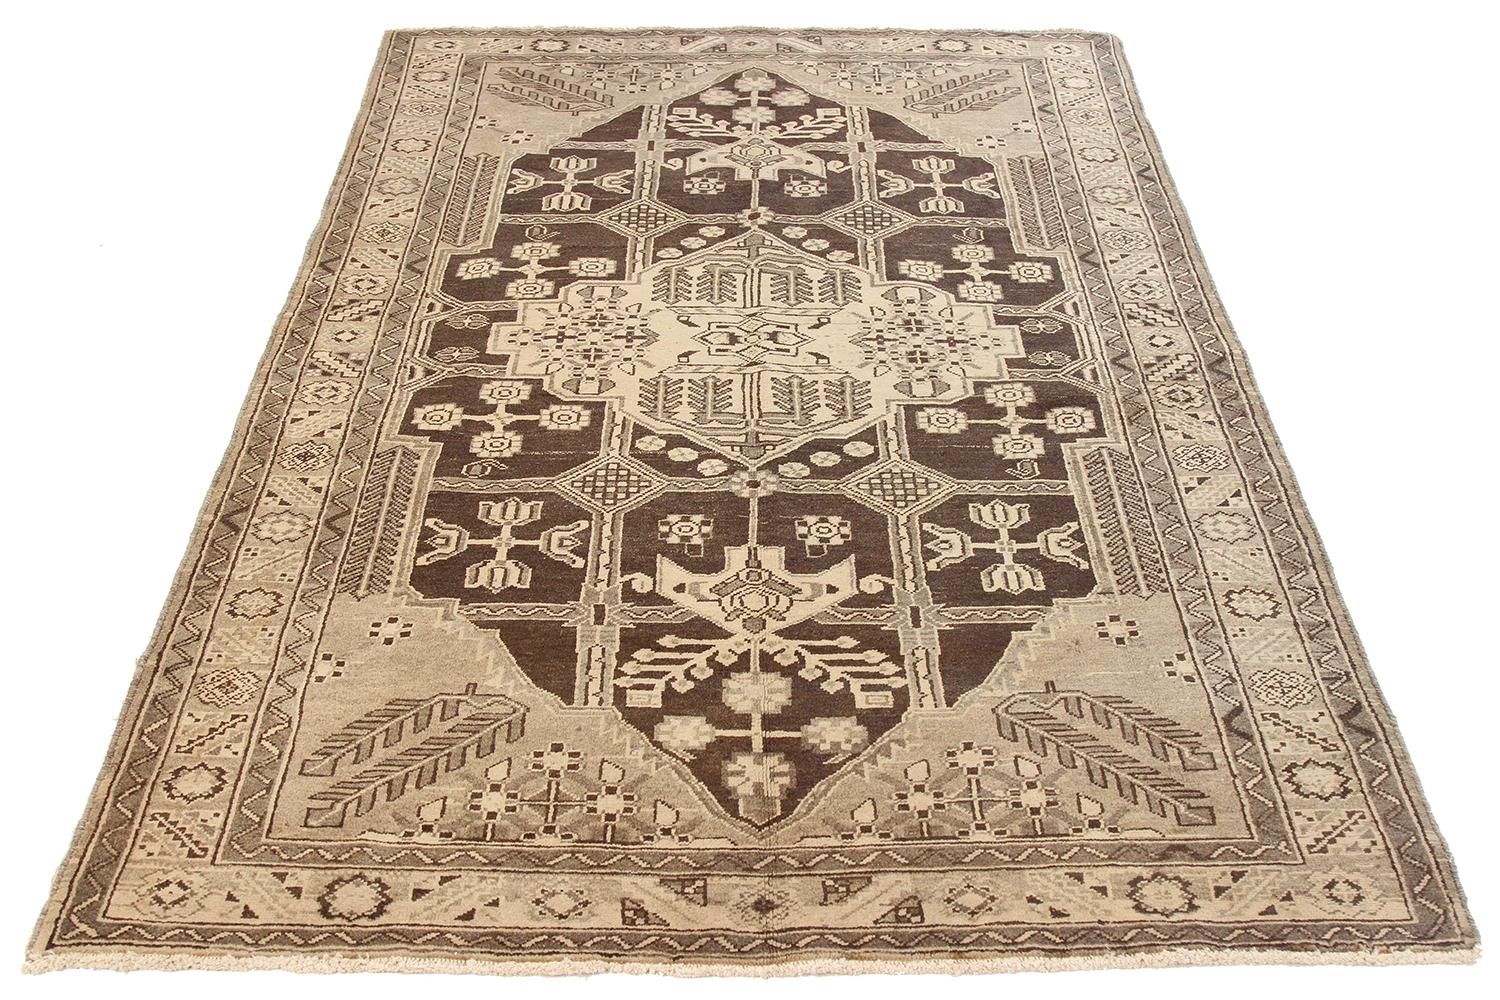 Antique Persian rug handwoven from the finest sheep’s wool and colored with all-natural vegetable dyes that are safe for humans and pets. It’s a traditional Shahsavan design highlighted by floral patterns on the brown field. It’s a beautiful piece